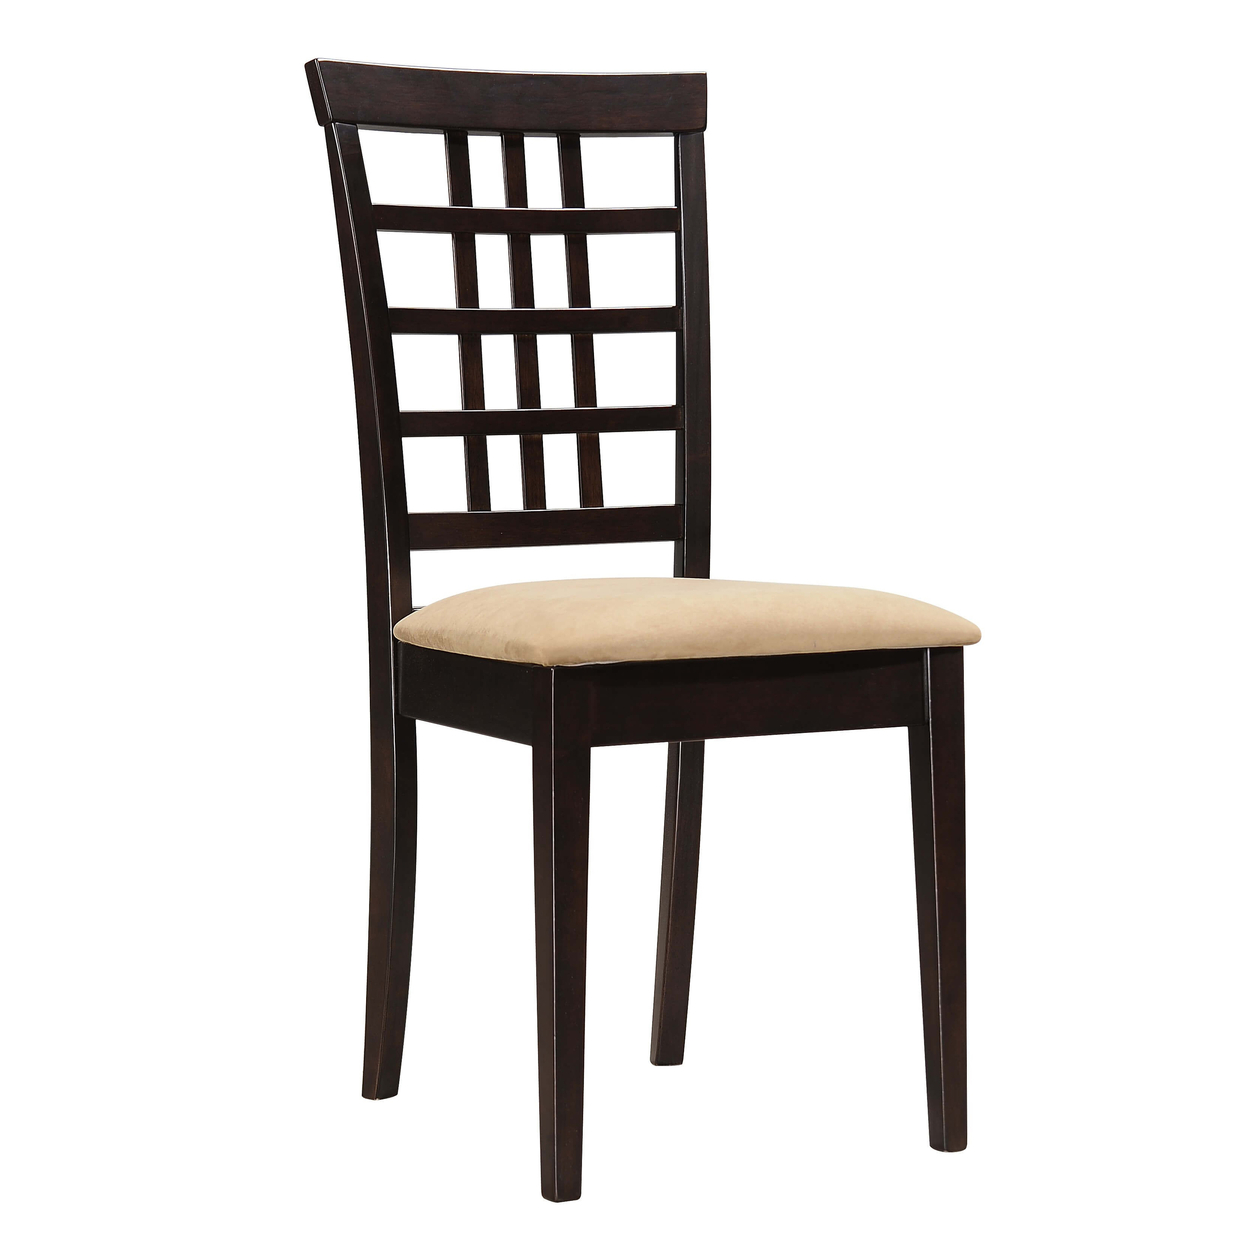 Geometric Wooden Dining Chair With Padded Seat, Set Of 2, Brown And Beige- Saltoro Sherpi